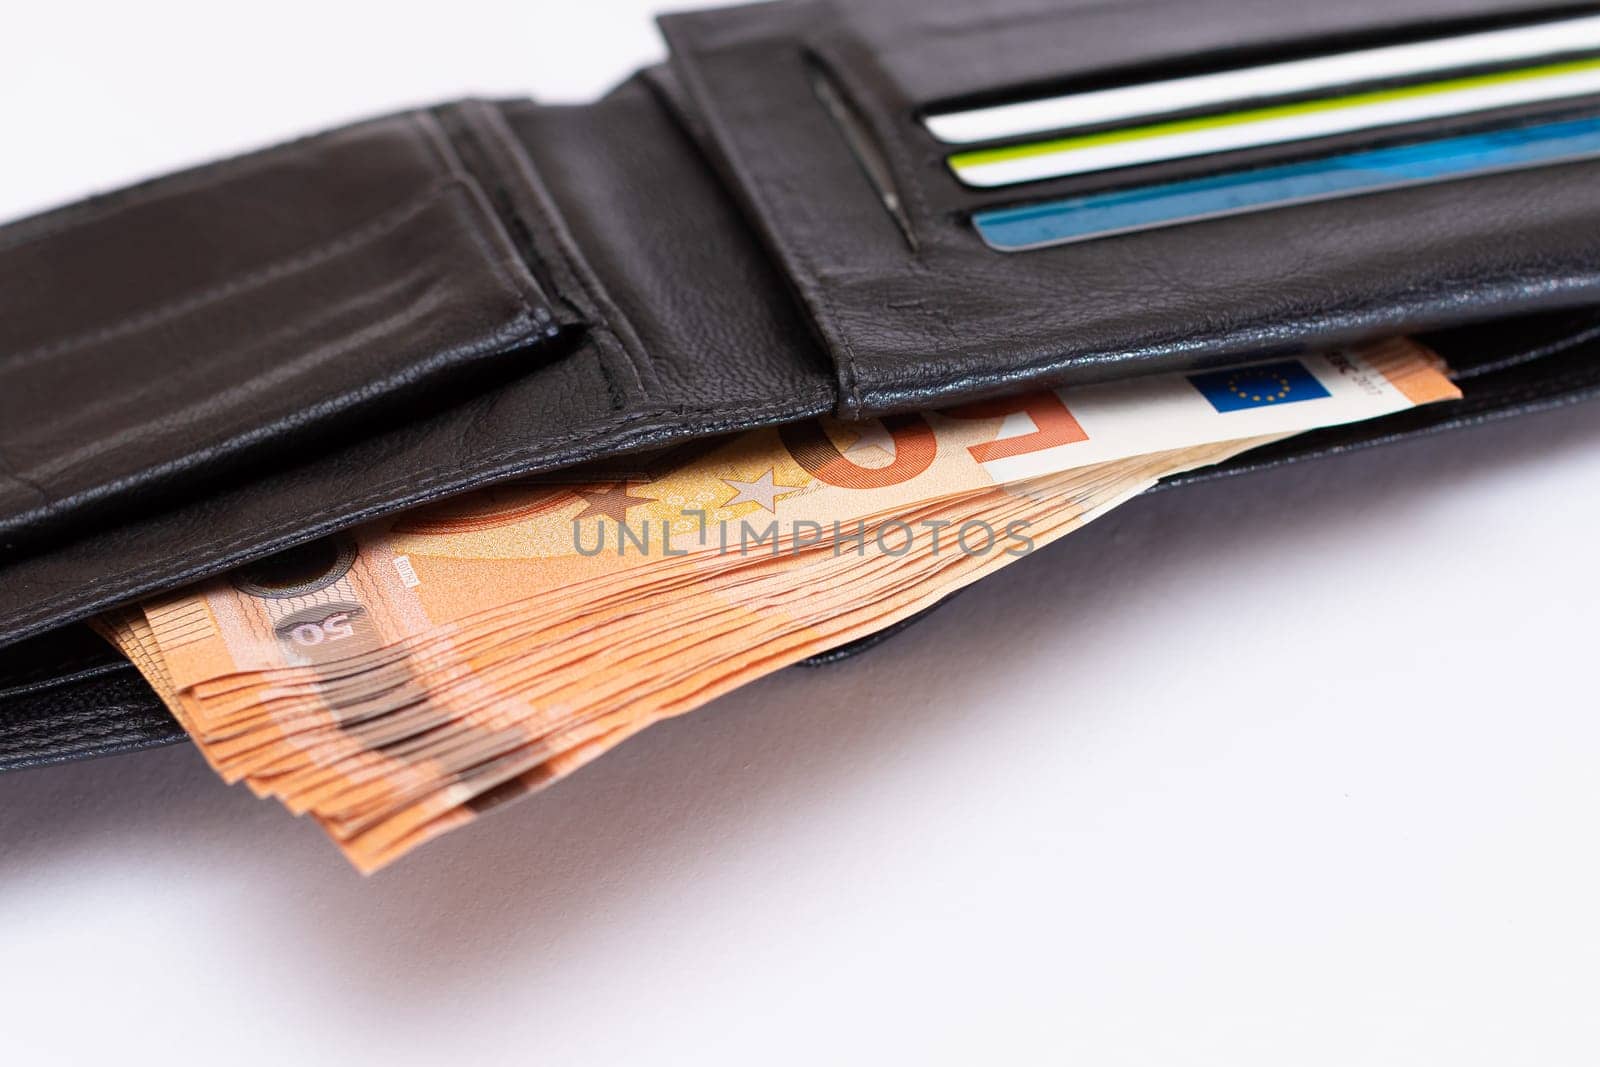 Opened Black Leather Men Wallet with Euro Banknotes Inside on White Background by InfinitumProdux